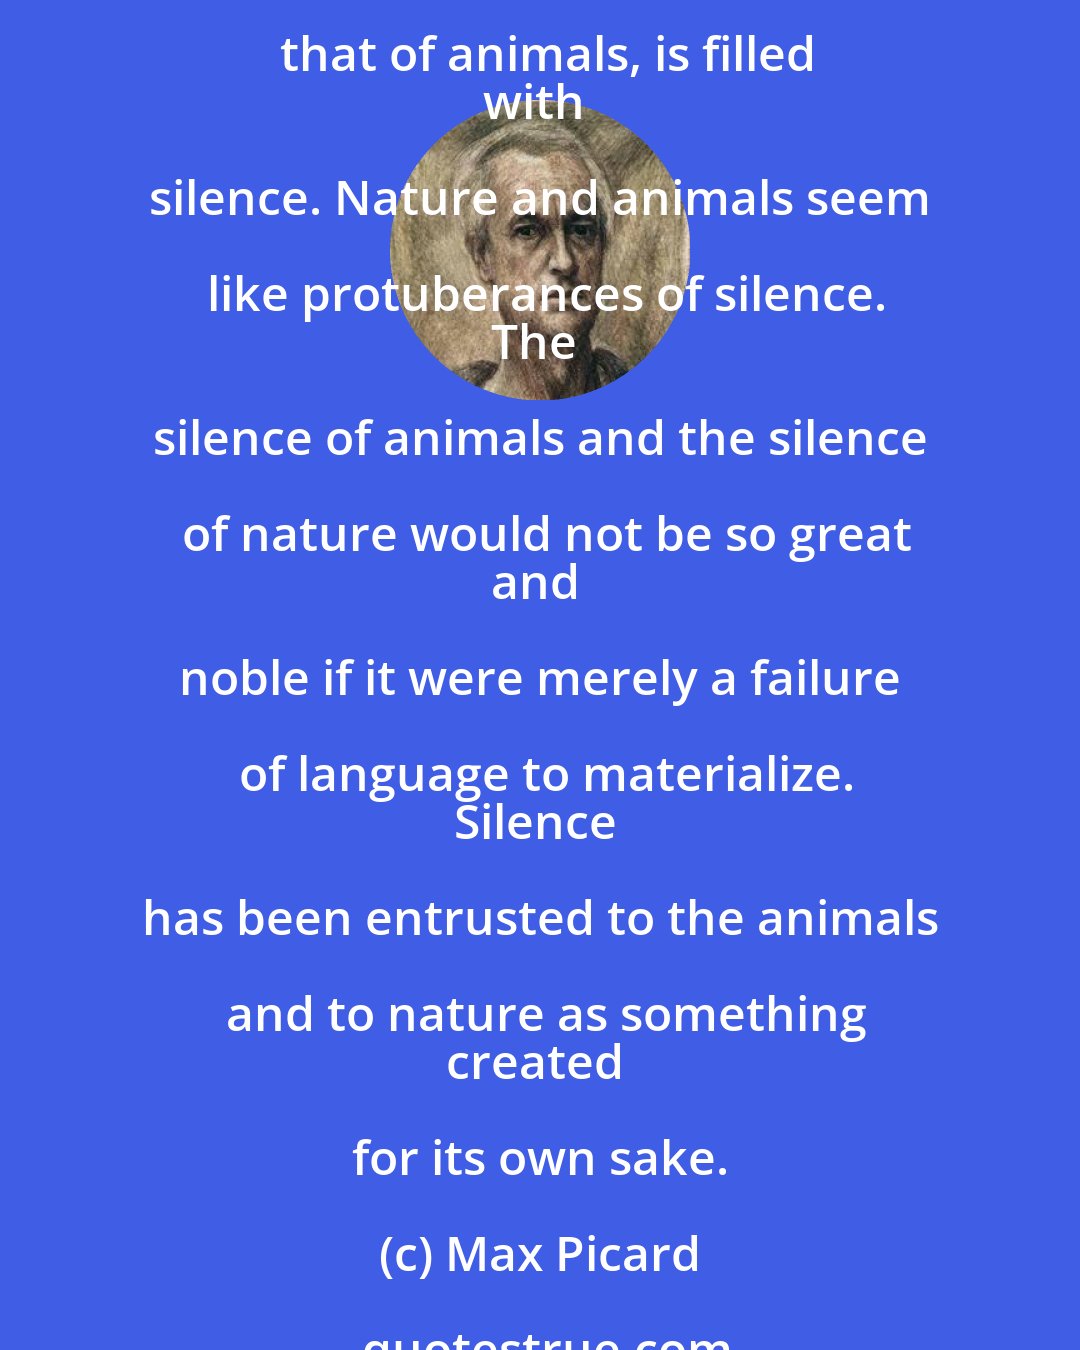 Max Picard: Many things that human words have upset are set at rest again by the
silence of animals. Animals move through the world like a caravan of
silence. A whole world, that of nature and that of animals, is filled
with silence. Nature and animals seem like protuberances of silence.
The silence of animals and the silence of nature would not be so great
and noble if it were merely a failure of language to materialize.
Silence has been entrusted to the animals and to nature as something
created for its own sake.